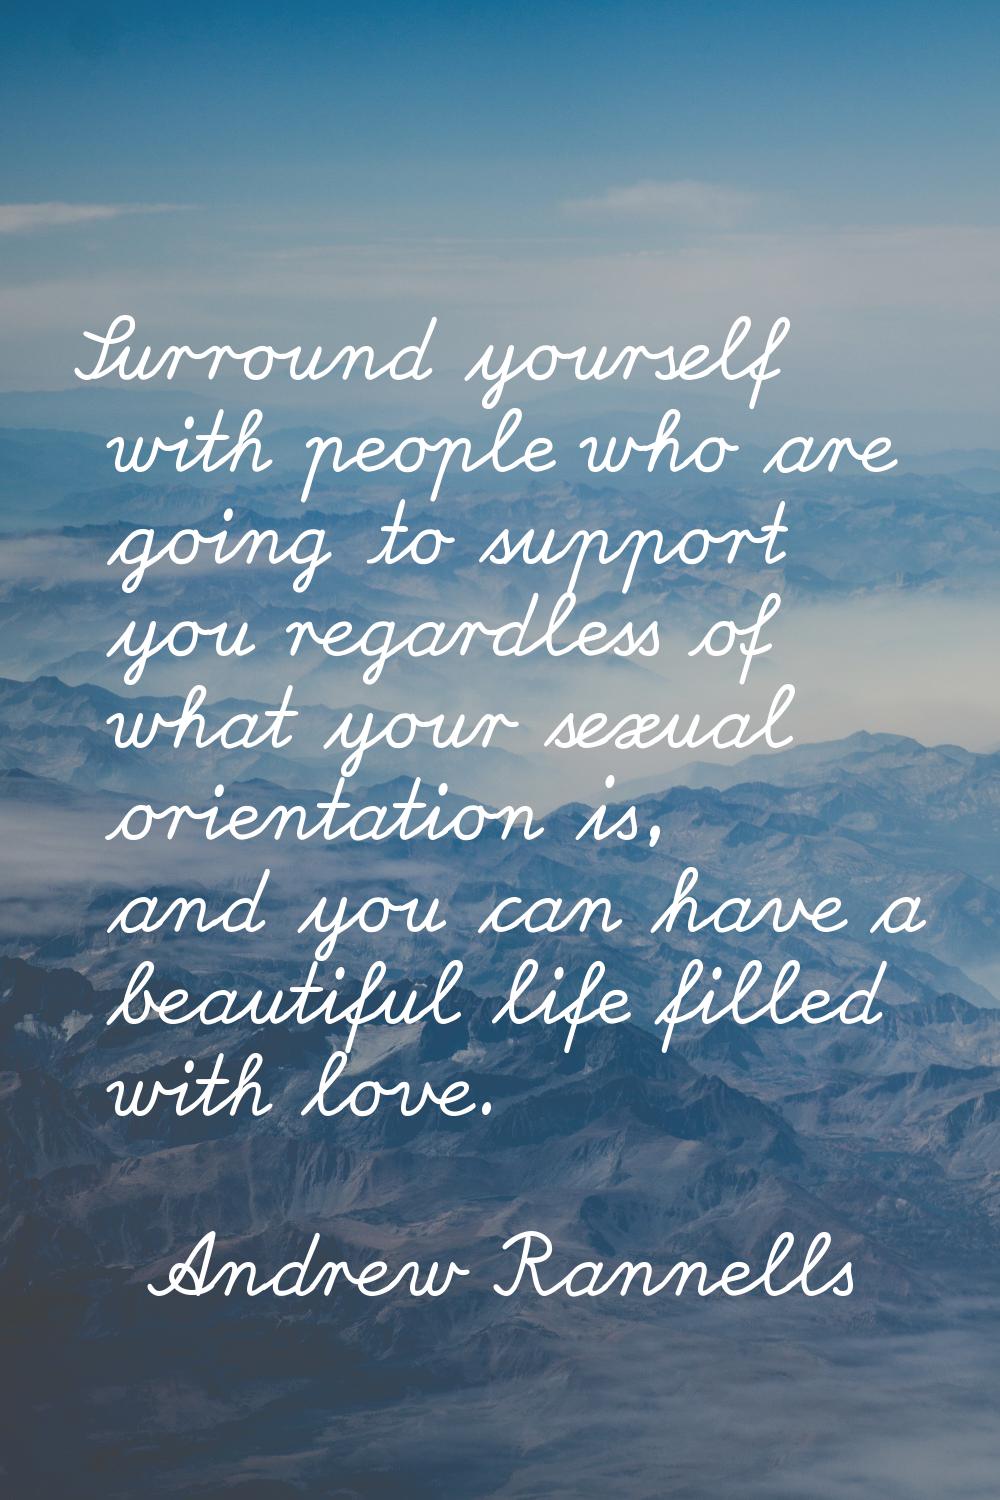 Surround yourself with people who are going to support you regardless of what your sexual orientati